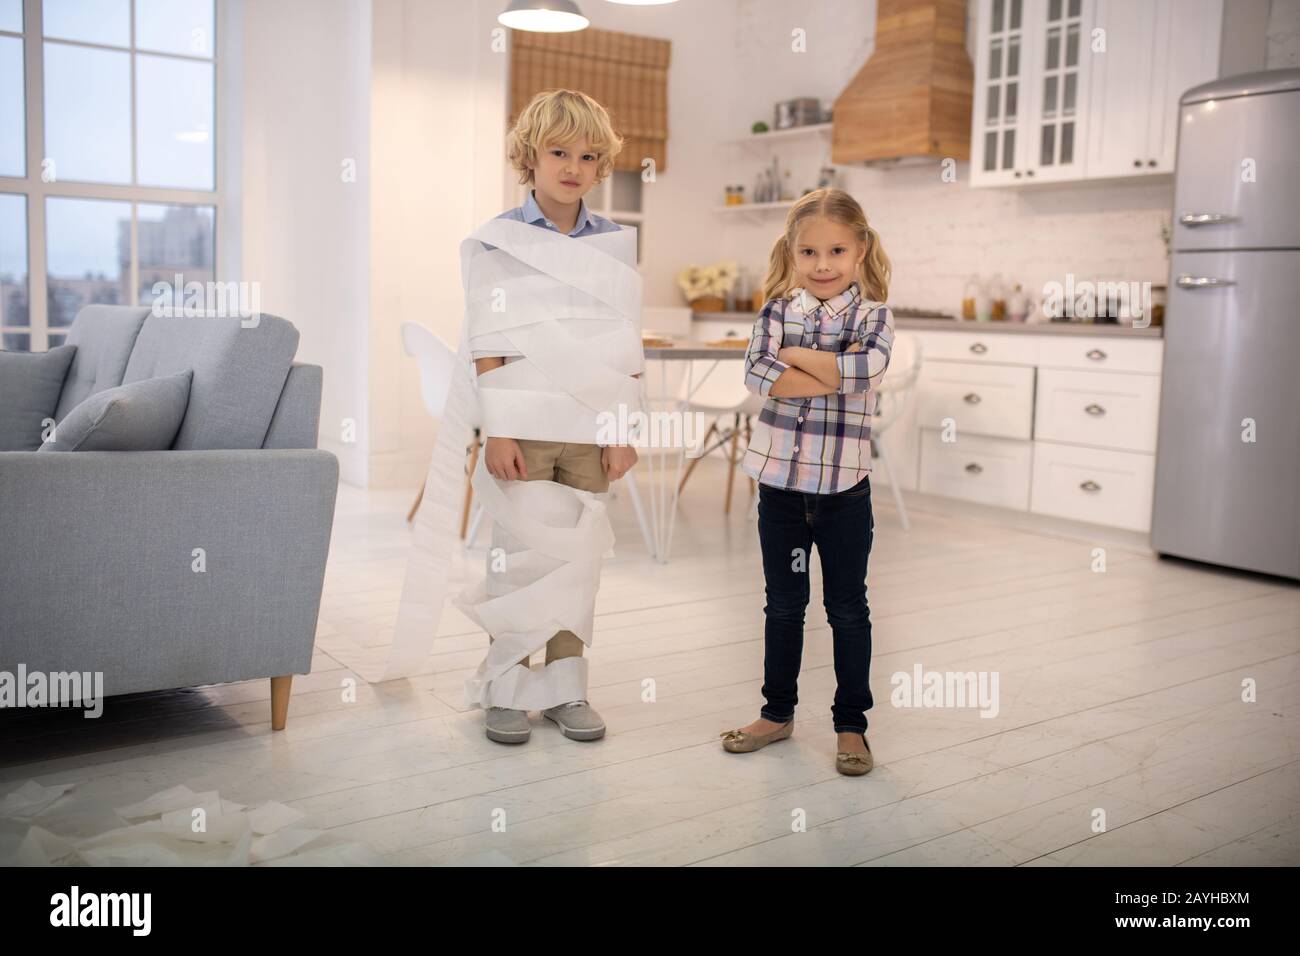 Two kids playing toilet paper mummy game at home and looking amused Stock Photo